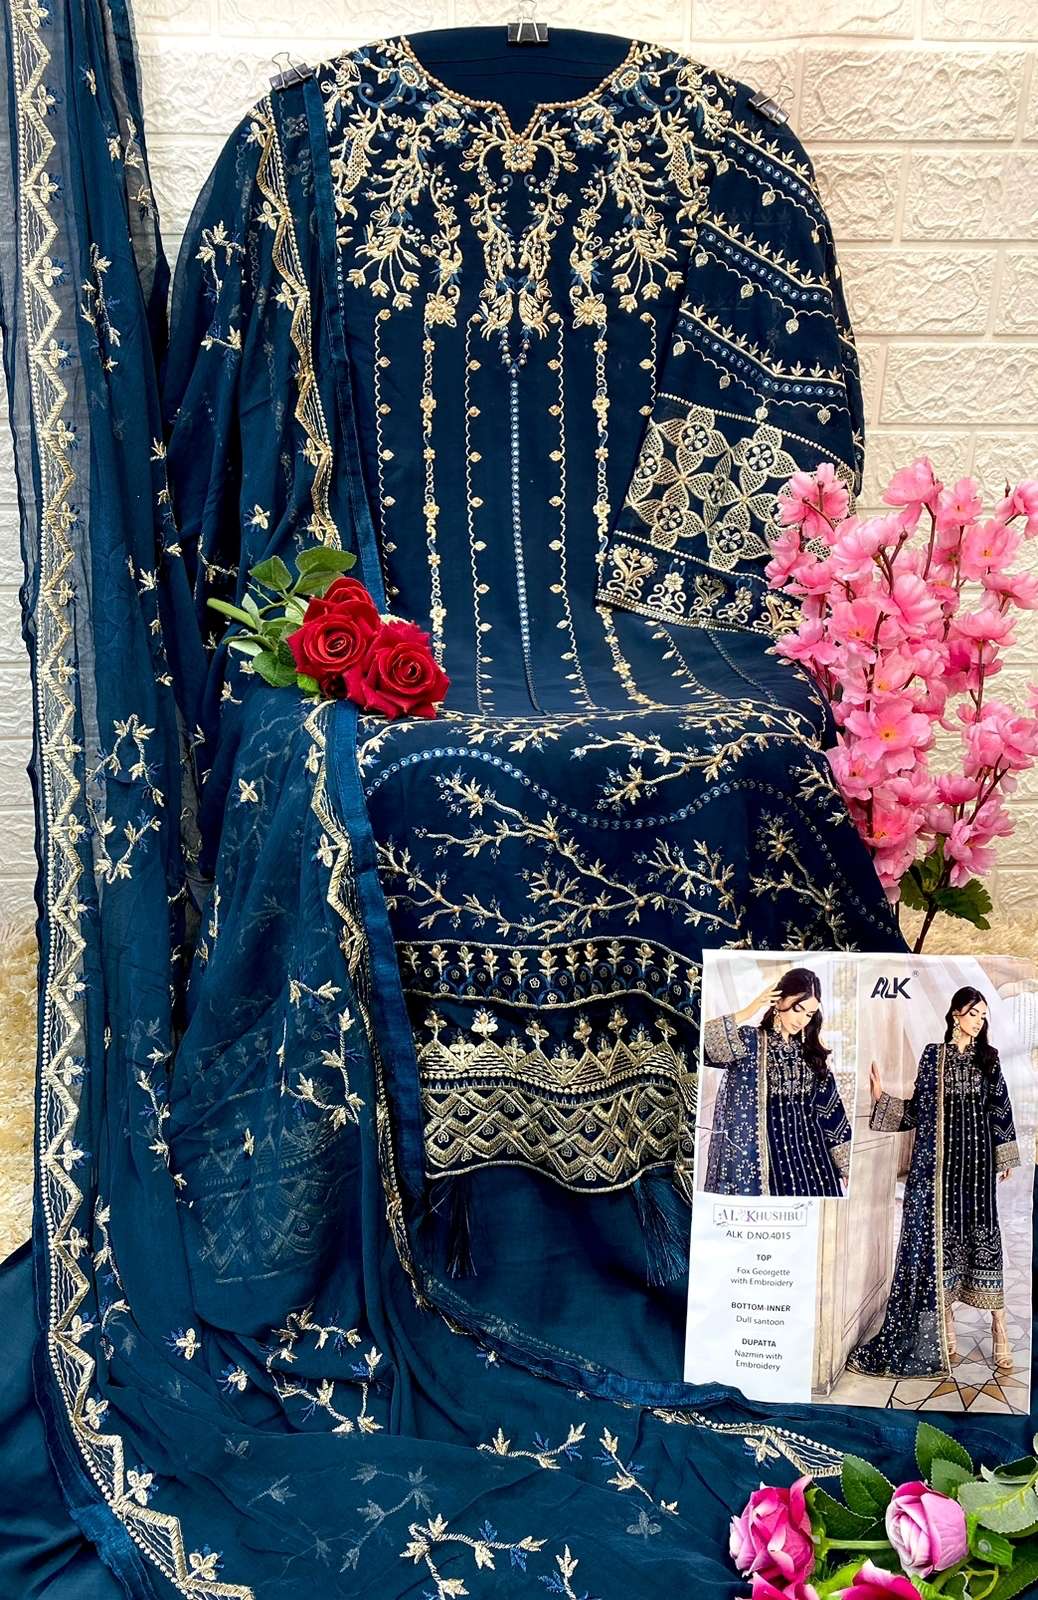 Al Khushbu Hit Design 4015 By Al Khushbu Beautiful Pakistani Suits Colorful Stylish Fancy Casual Wear & Ethnic Wear Faux Georgette Embroidered Dresses At Wholesale Price